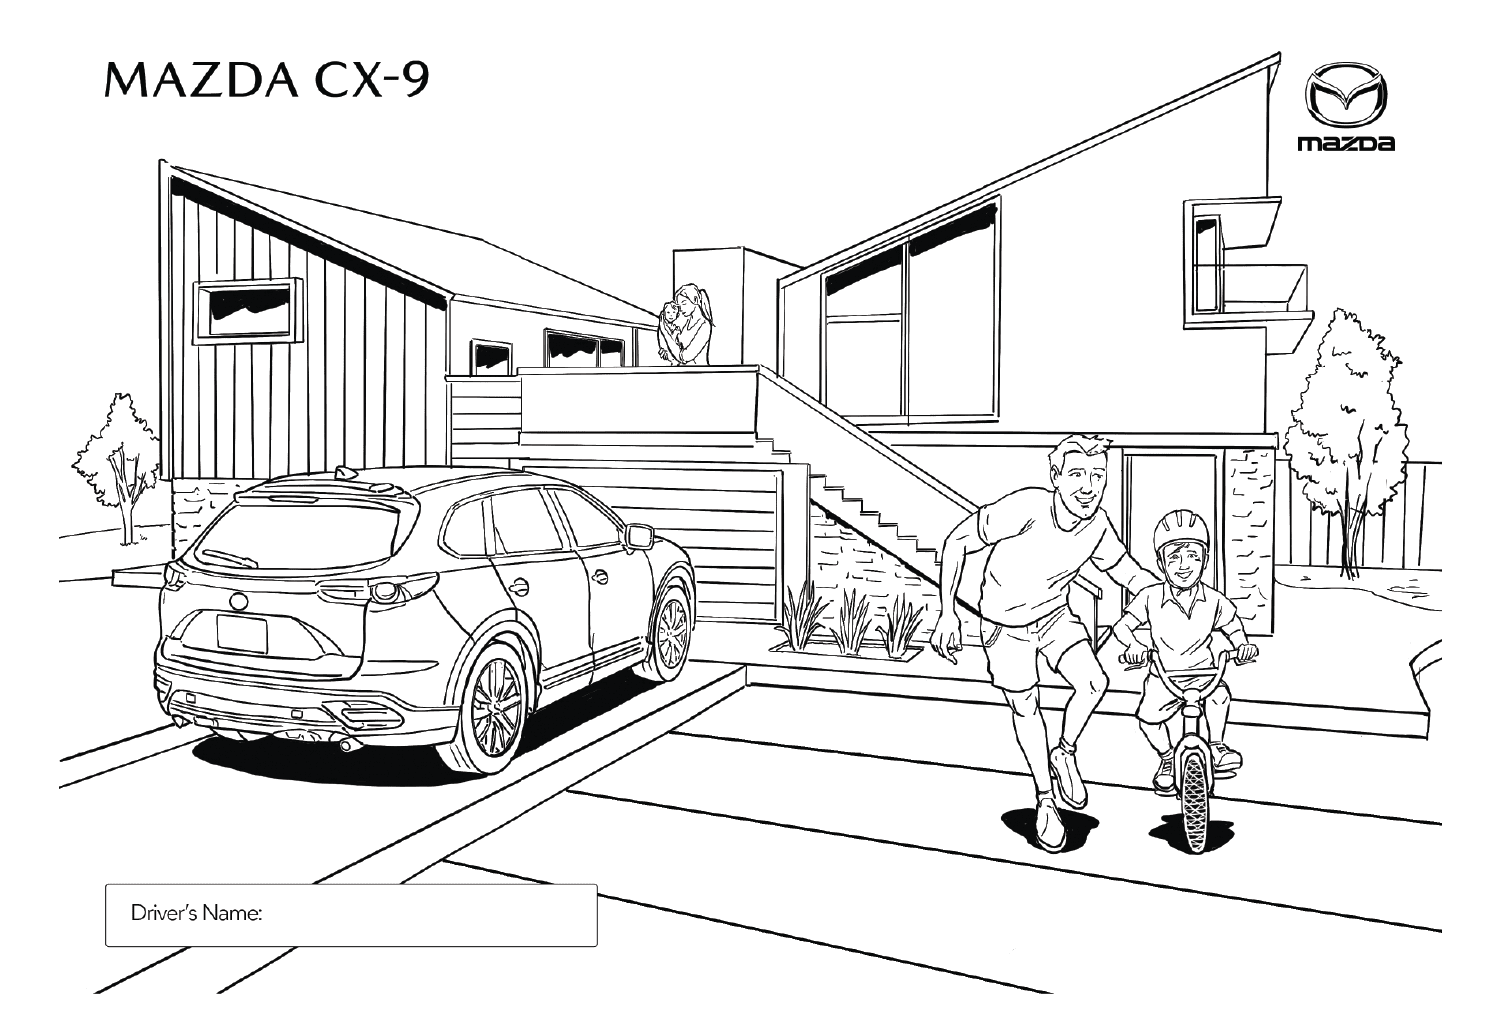 Mazda CX-9 Coloring Page from Mazda